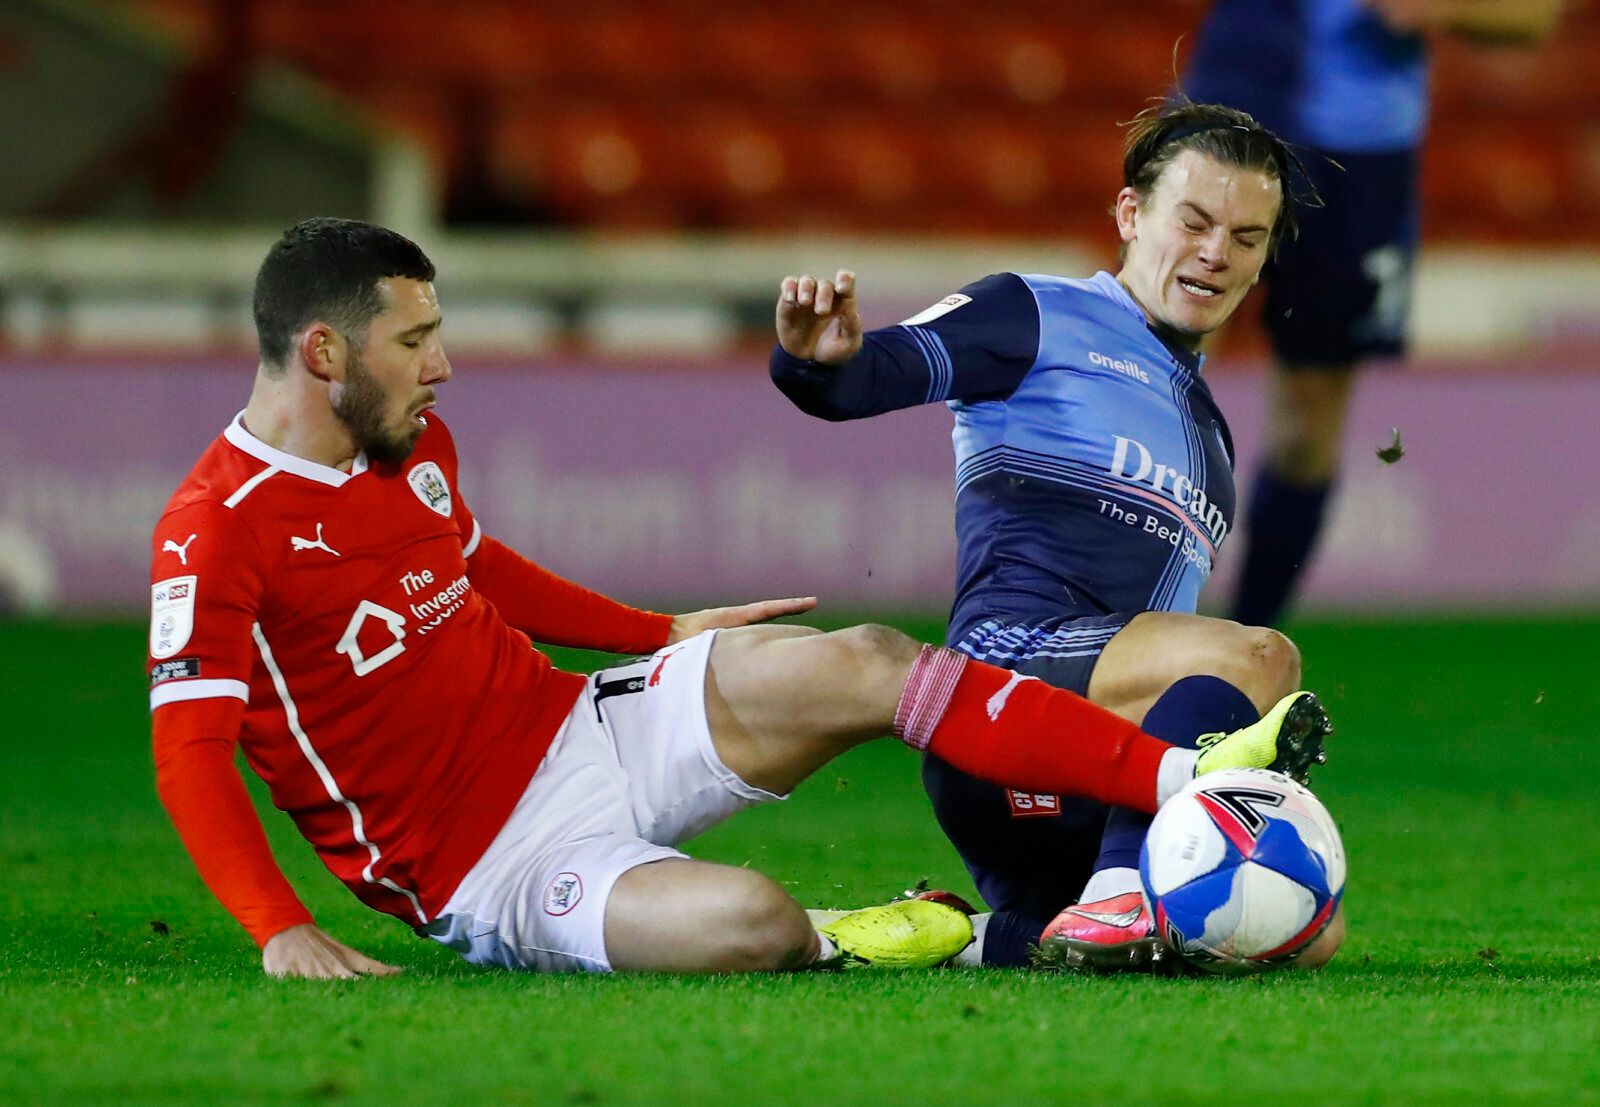 Soccer Football - Championship - Barnsley v Wycombe Wanderers - Oakwell, Barnsley, Britain - December 9, 2020 Barnsley's Conor Chaplin in action with Wycombe Wanderers' Dominic Gape Action Images/Jason Cairnduff EDITORIAL USE ONLY. No use with unauthorized audio, video, data, fixture lists, club/league logos or 'live' services. Online in-match use limited to 75 images, no video emulation. No use in betting, games or single club /league/player publications.  Please contact your account representa